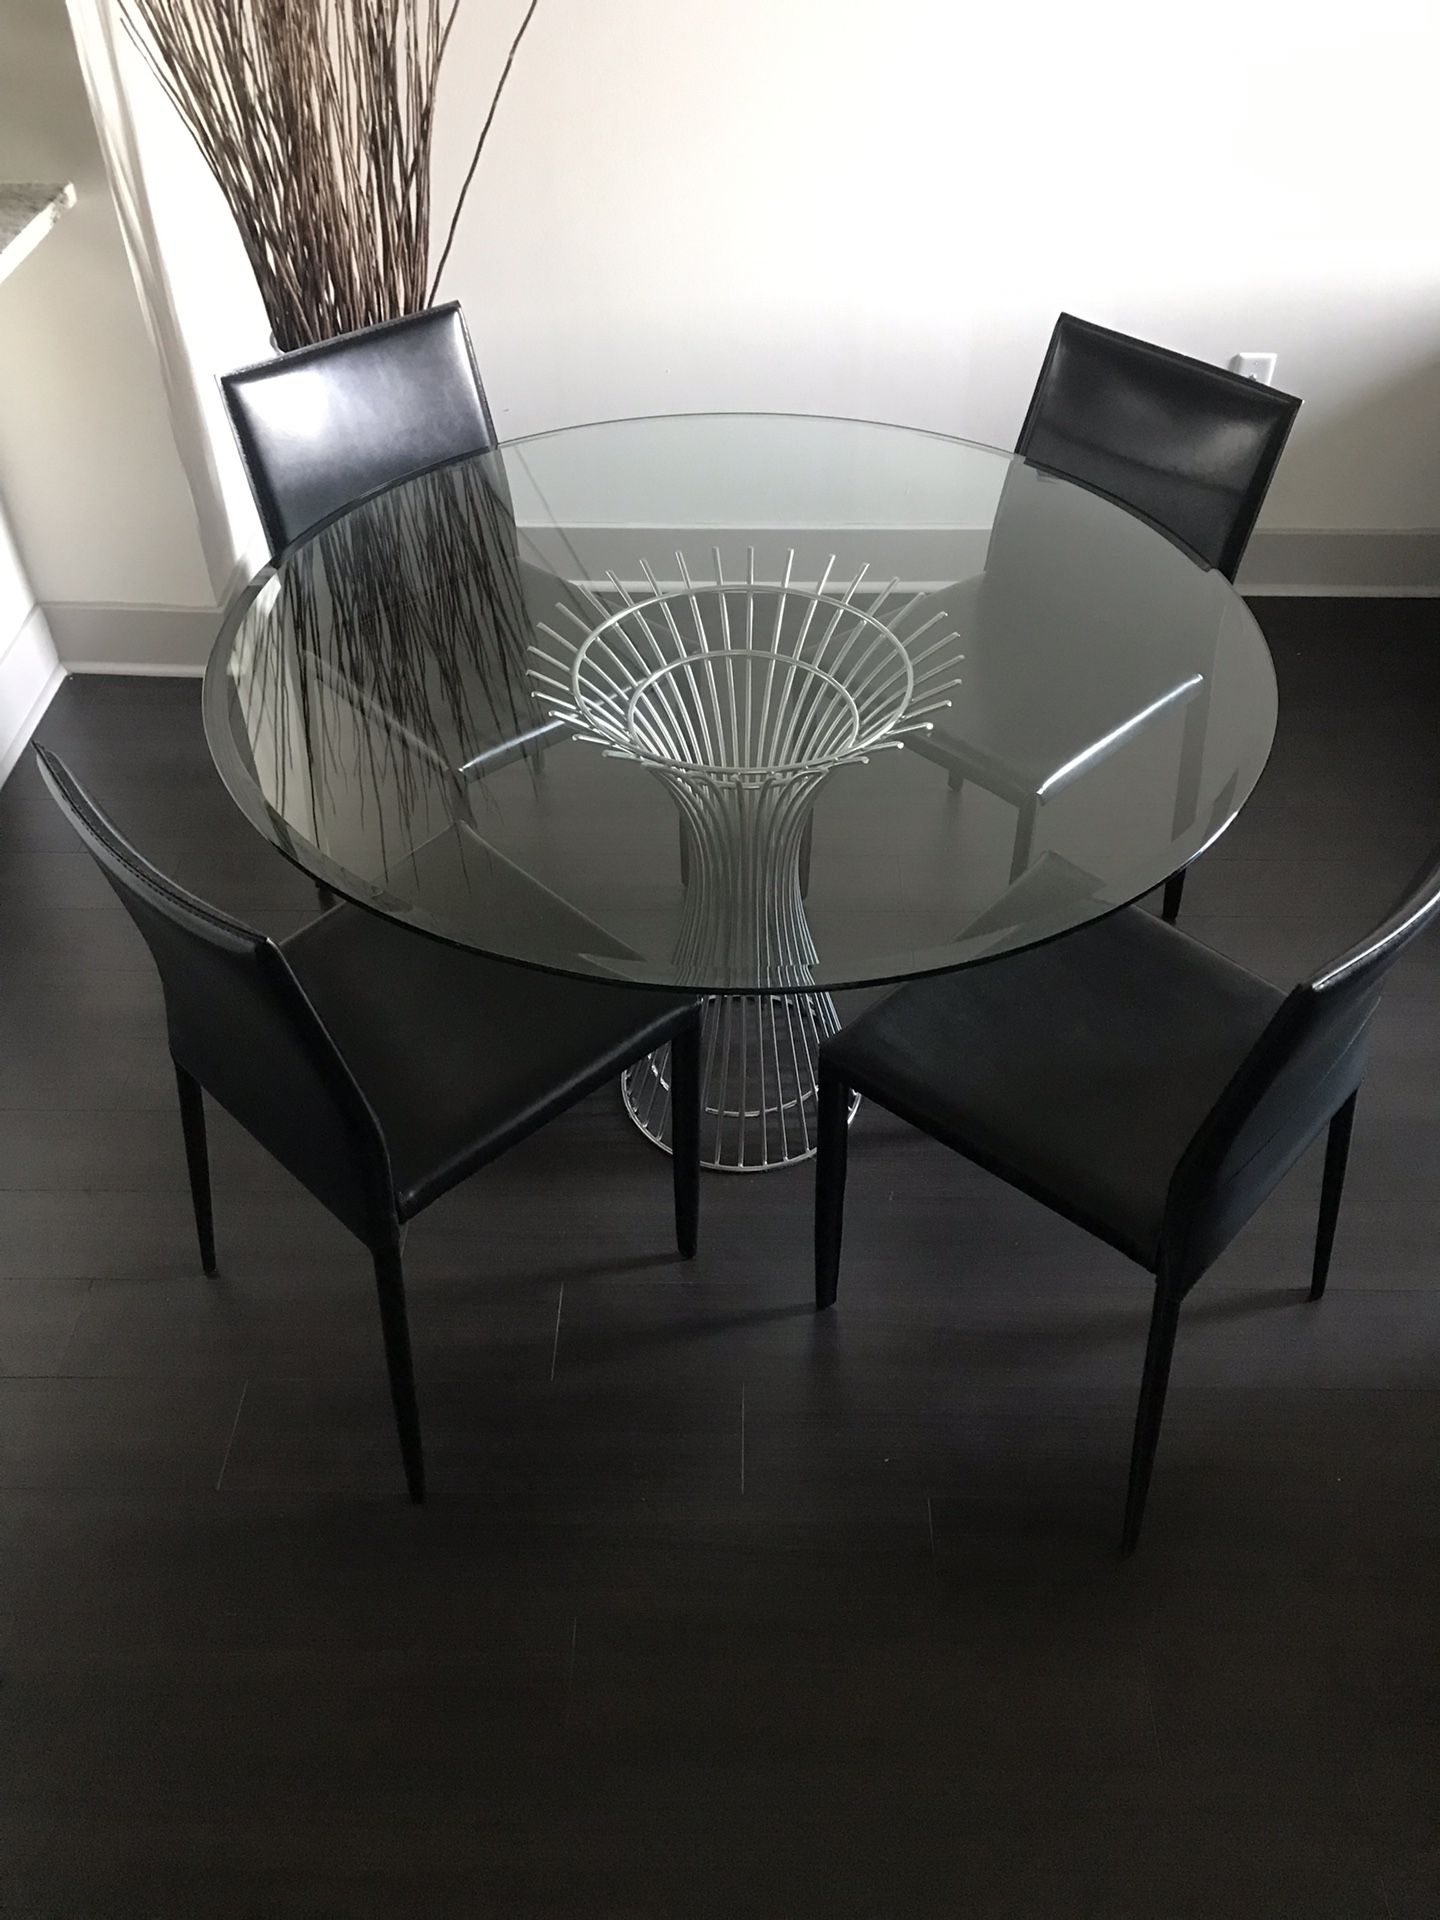 New dinning table with black leather chairs